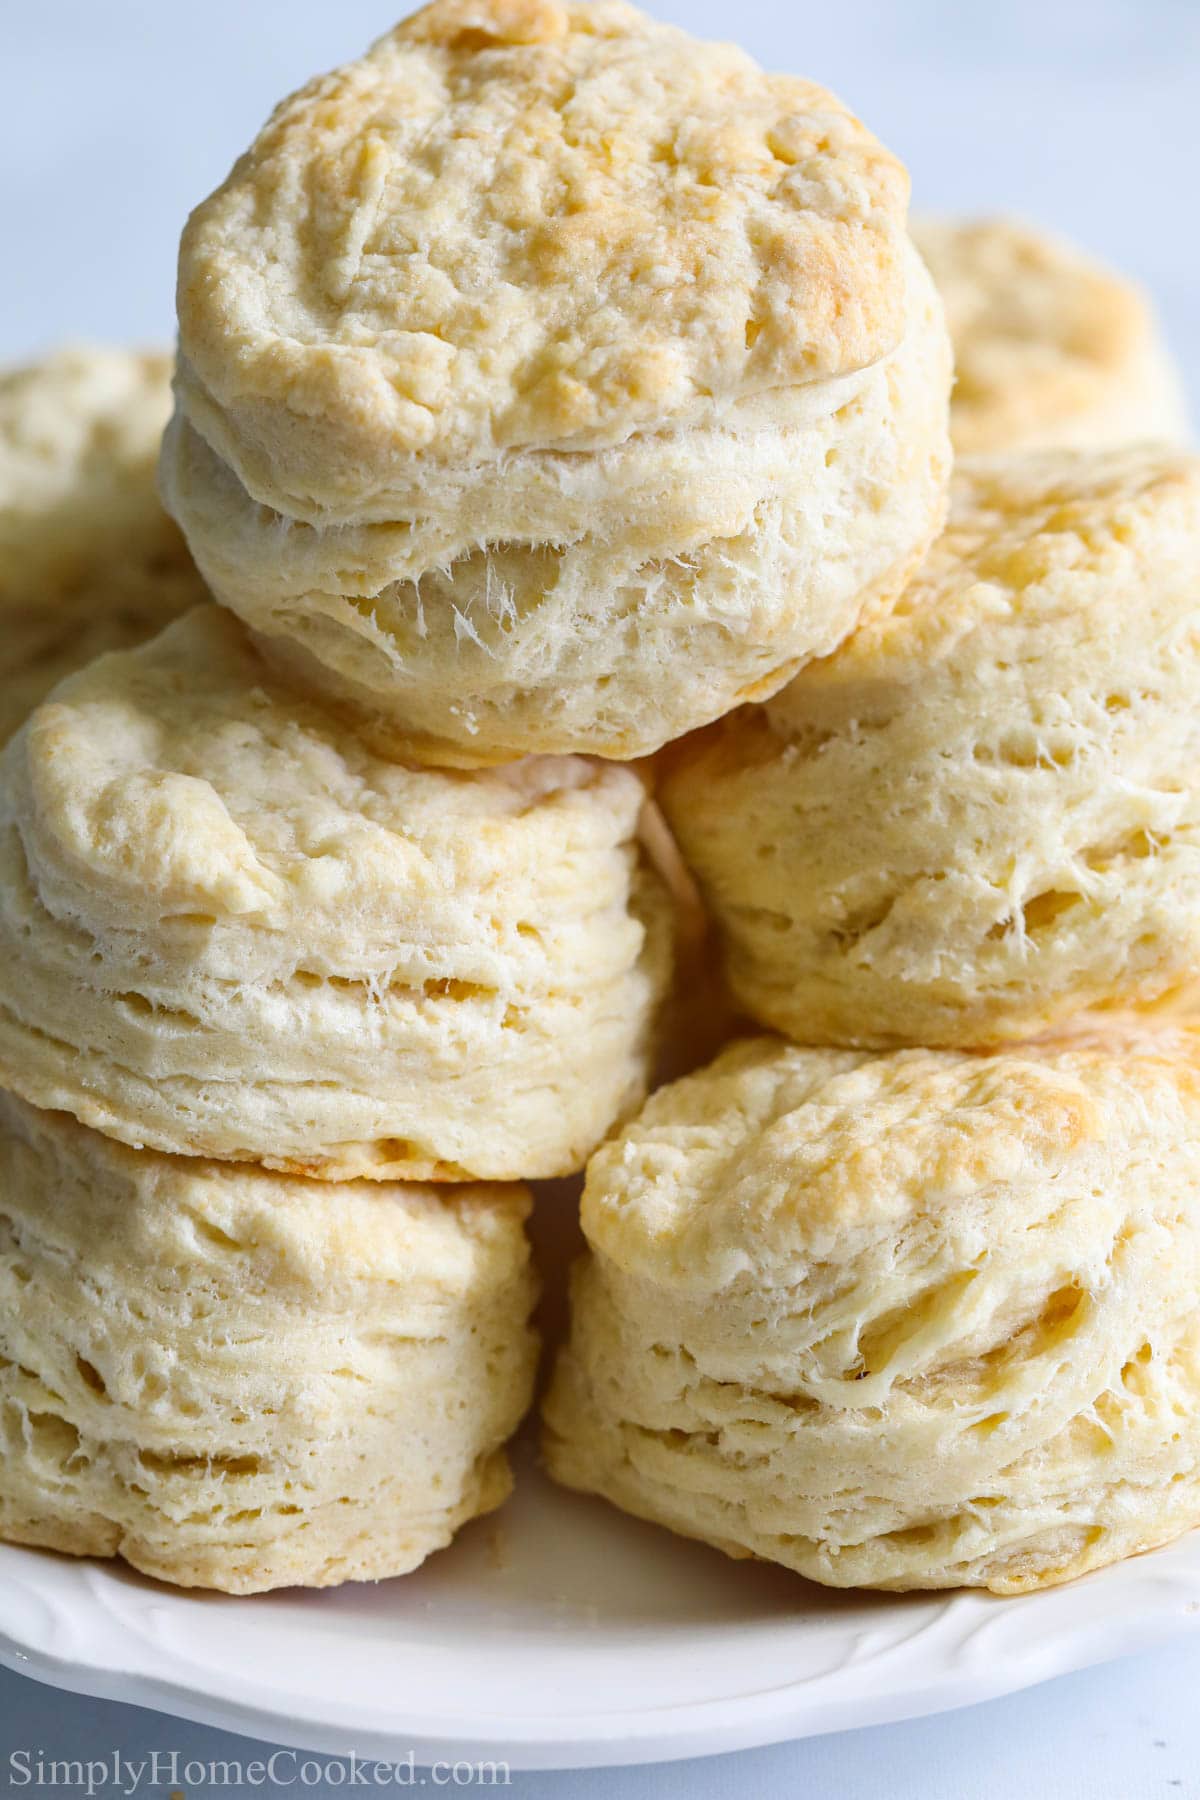 Vertical image of a pile of Buttermilk Biscuits